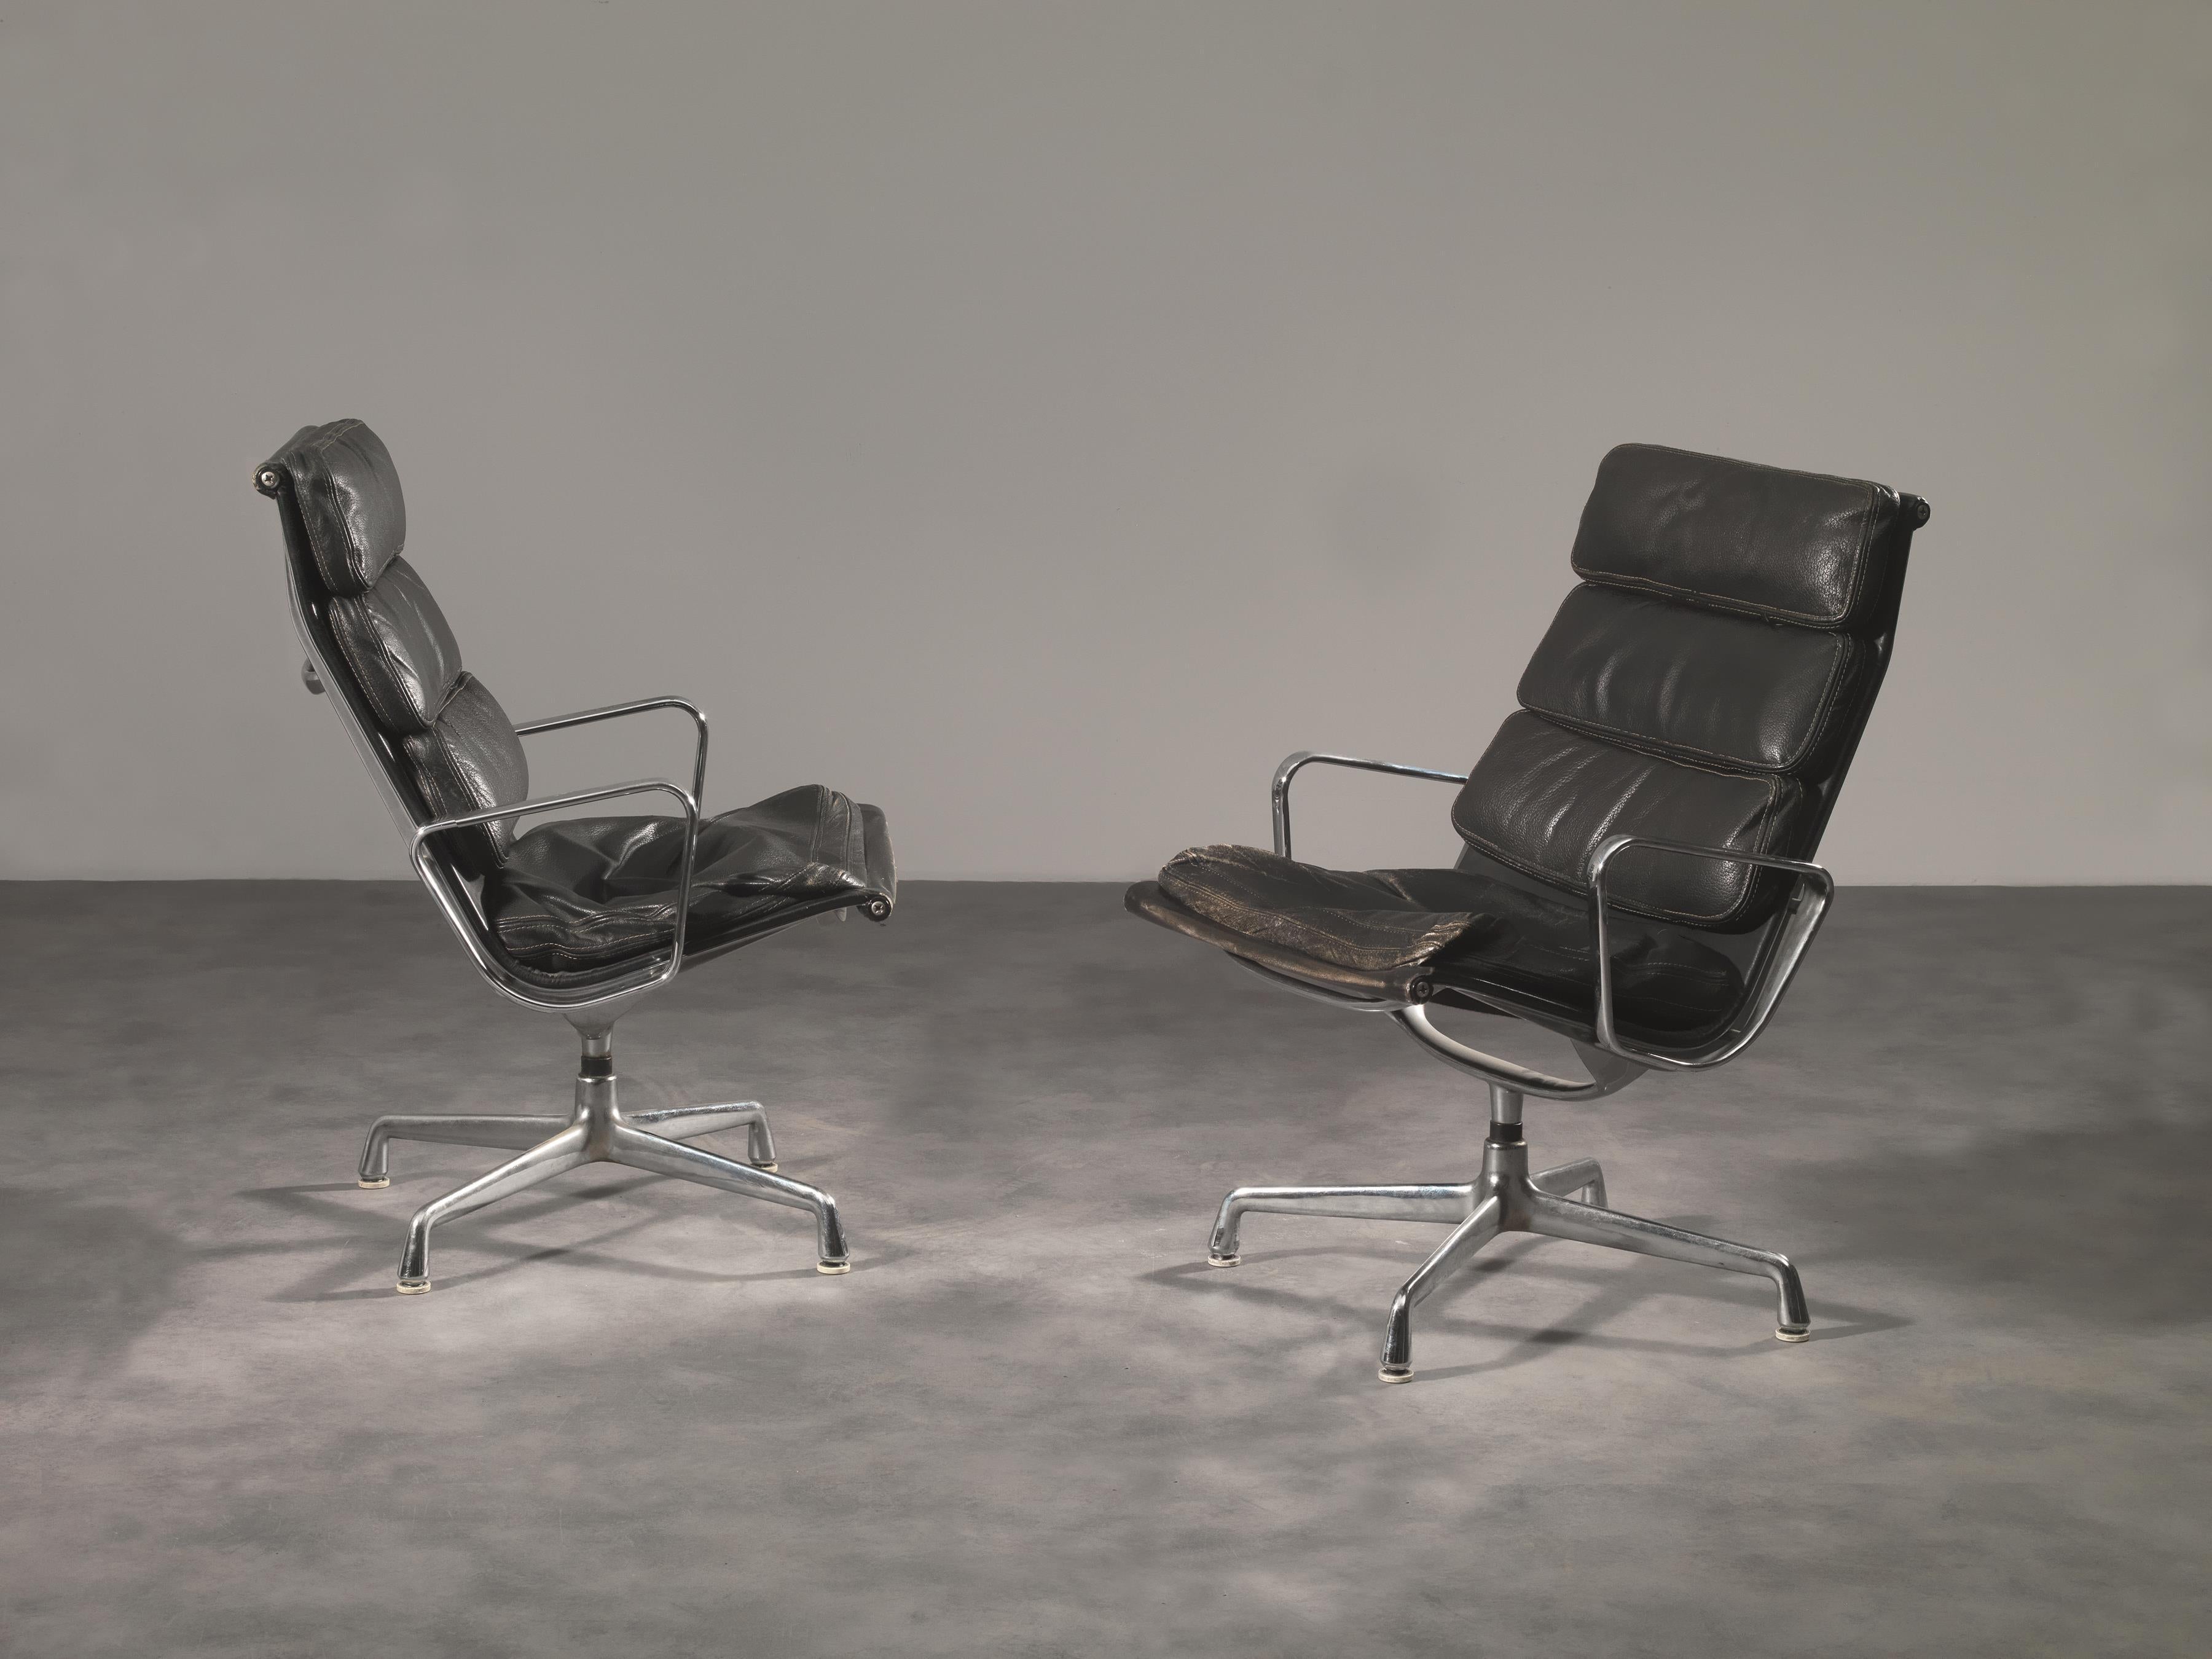 Set of two office armchairs 'Time-Life' designed by Charles and Ray Eames for Herman Miller (1960).
Armchairs with aluminium structure and black leather upholstery.

 